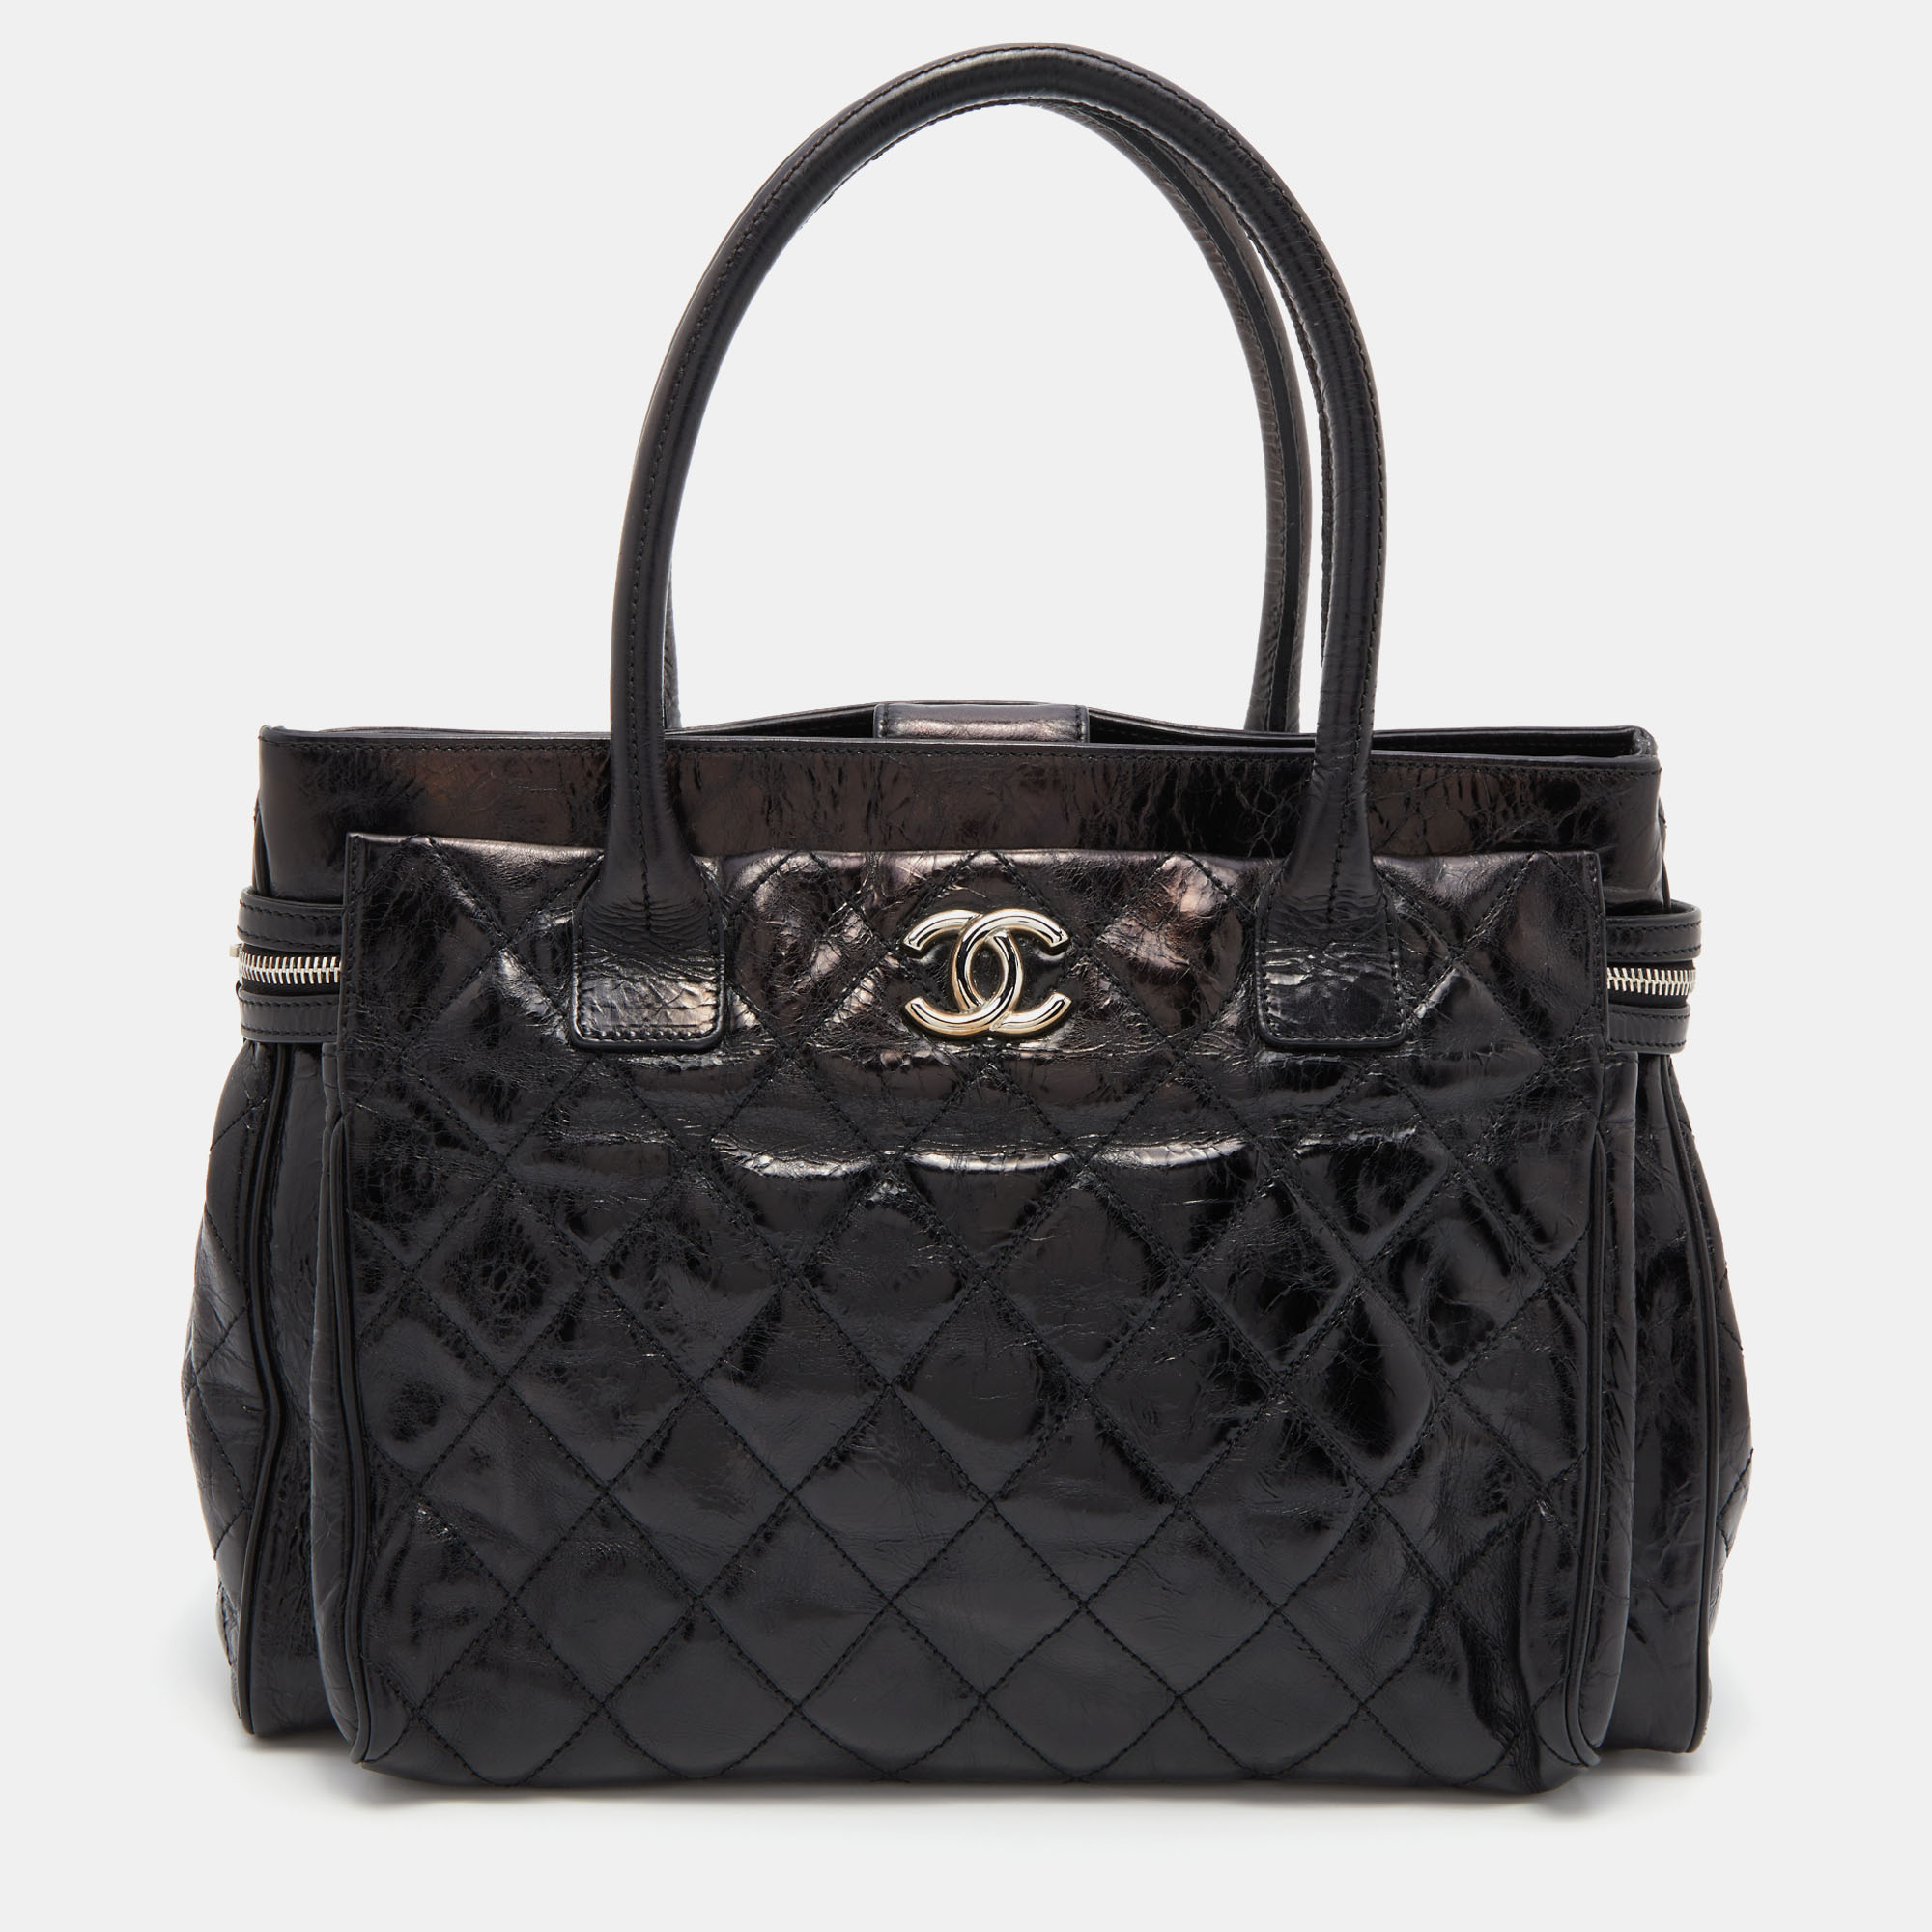 Pre-owned Chanel Black Quilted Glazed Leather Portobello Tote